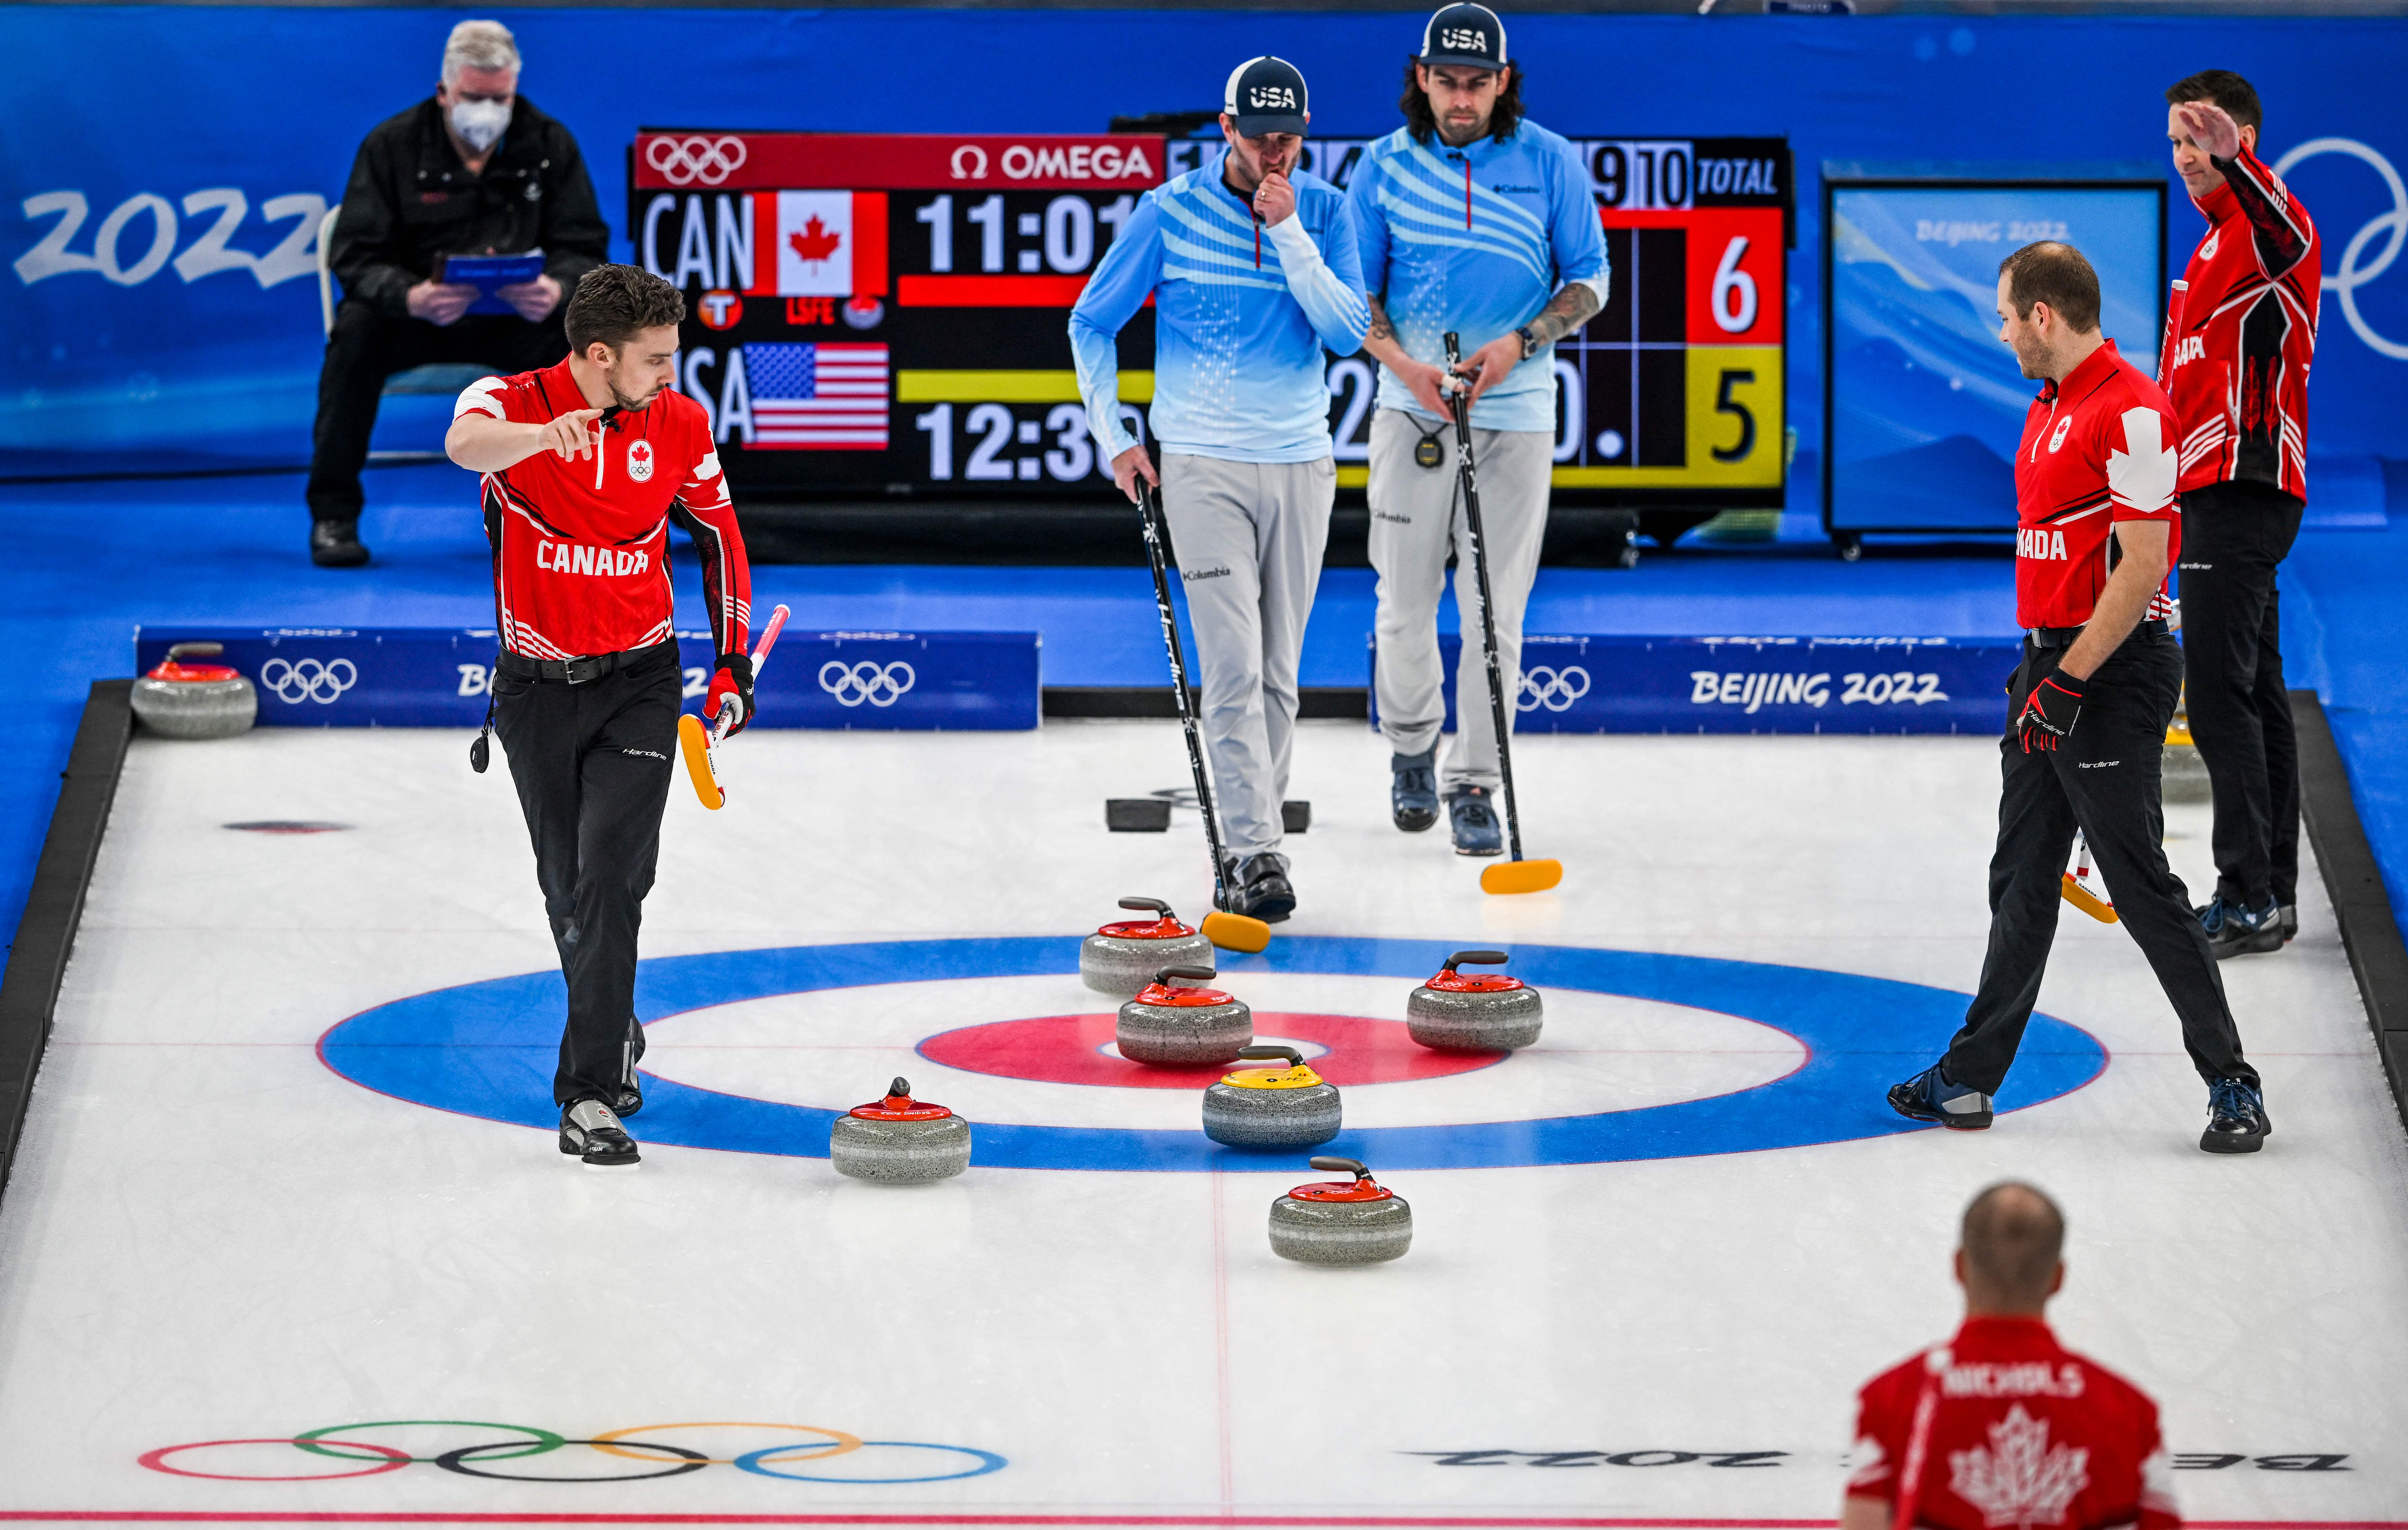 In A Battle Of The Curling Vets Brad Gushue Leads Canada To Bronze Medal Win Over John Shuster And Us The Boston Globe